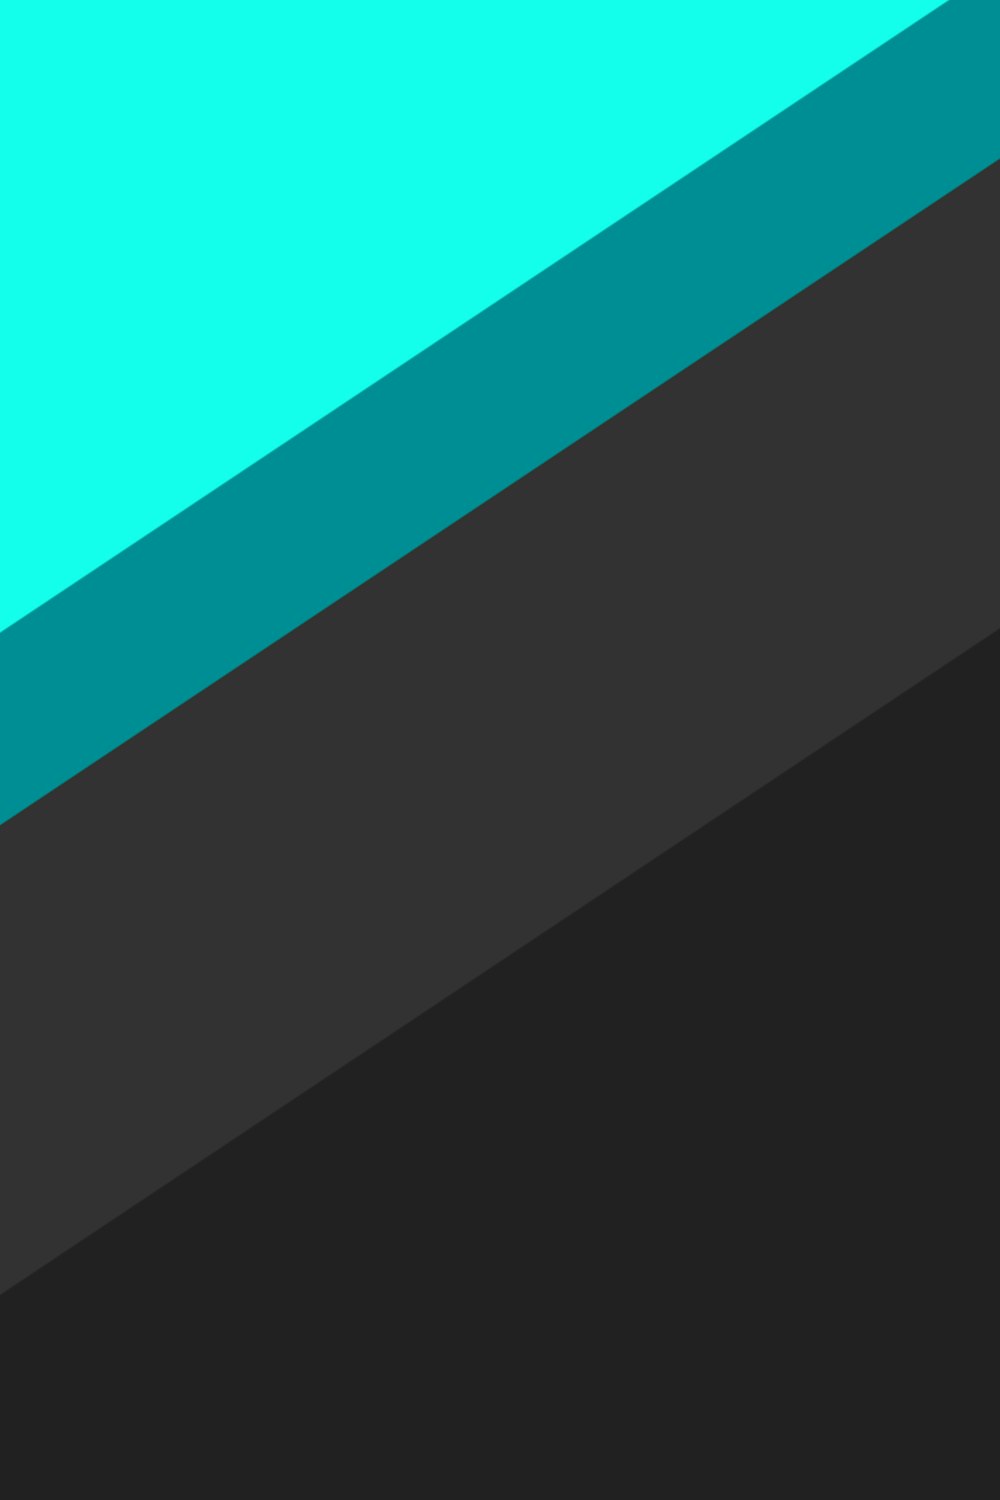 teal and black striped textile